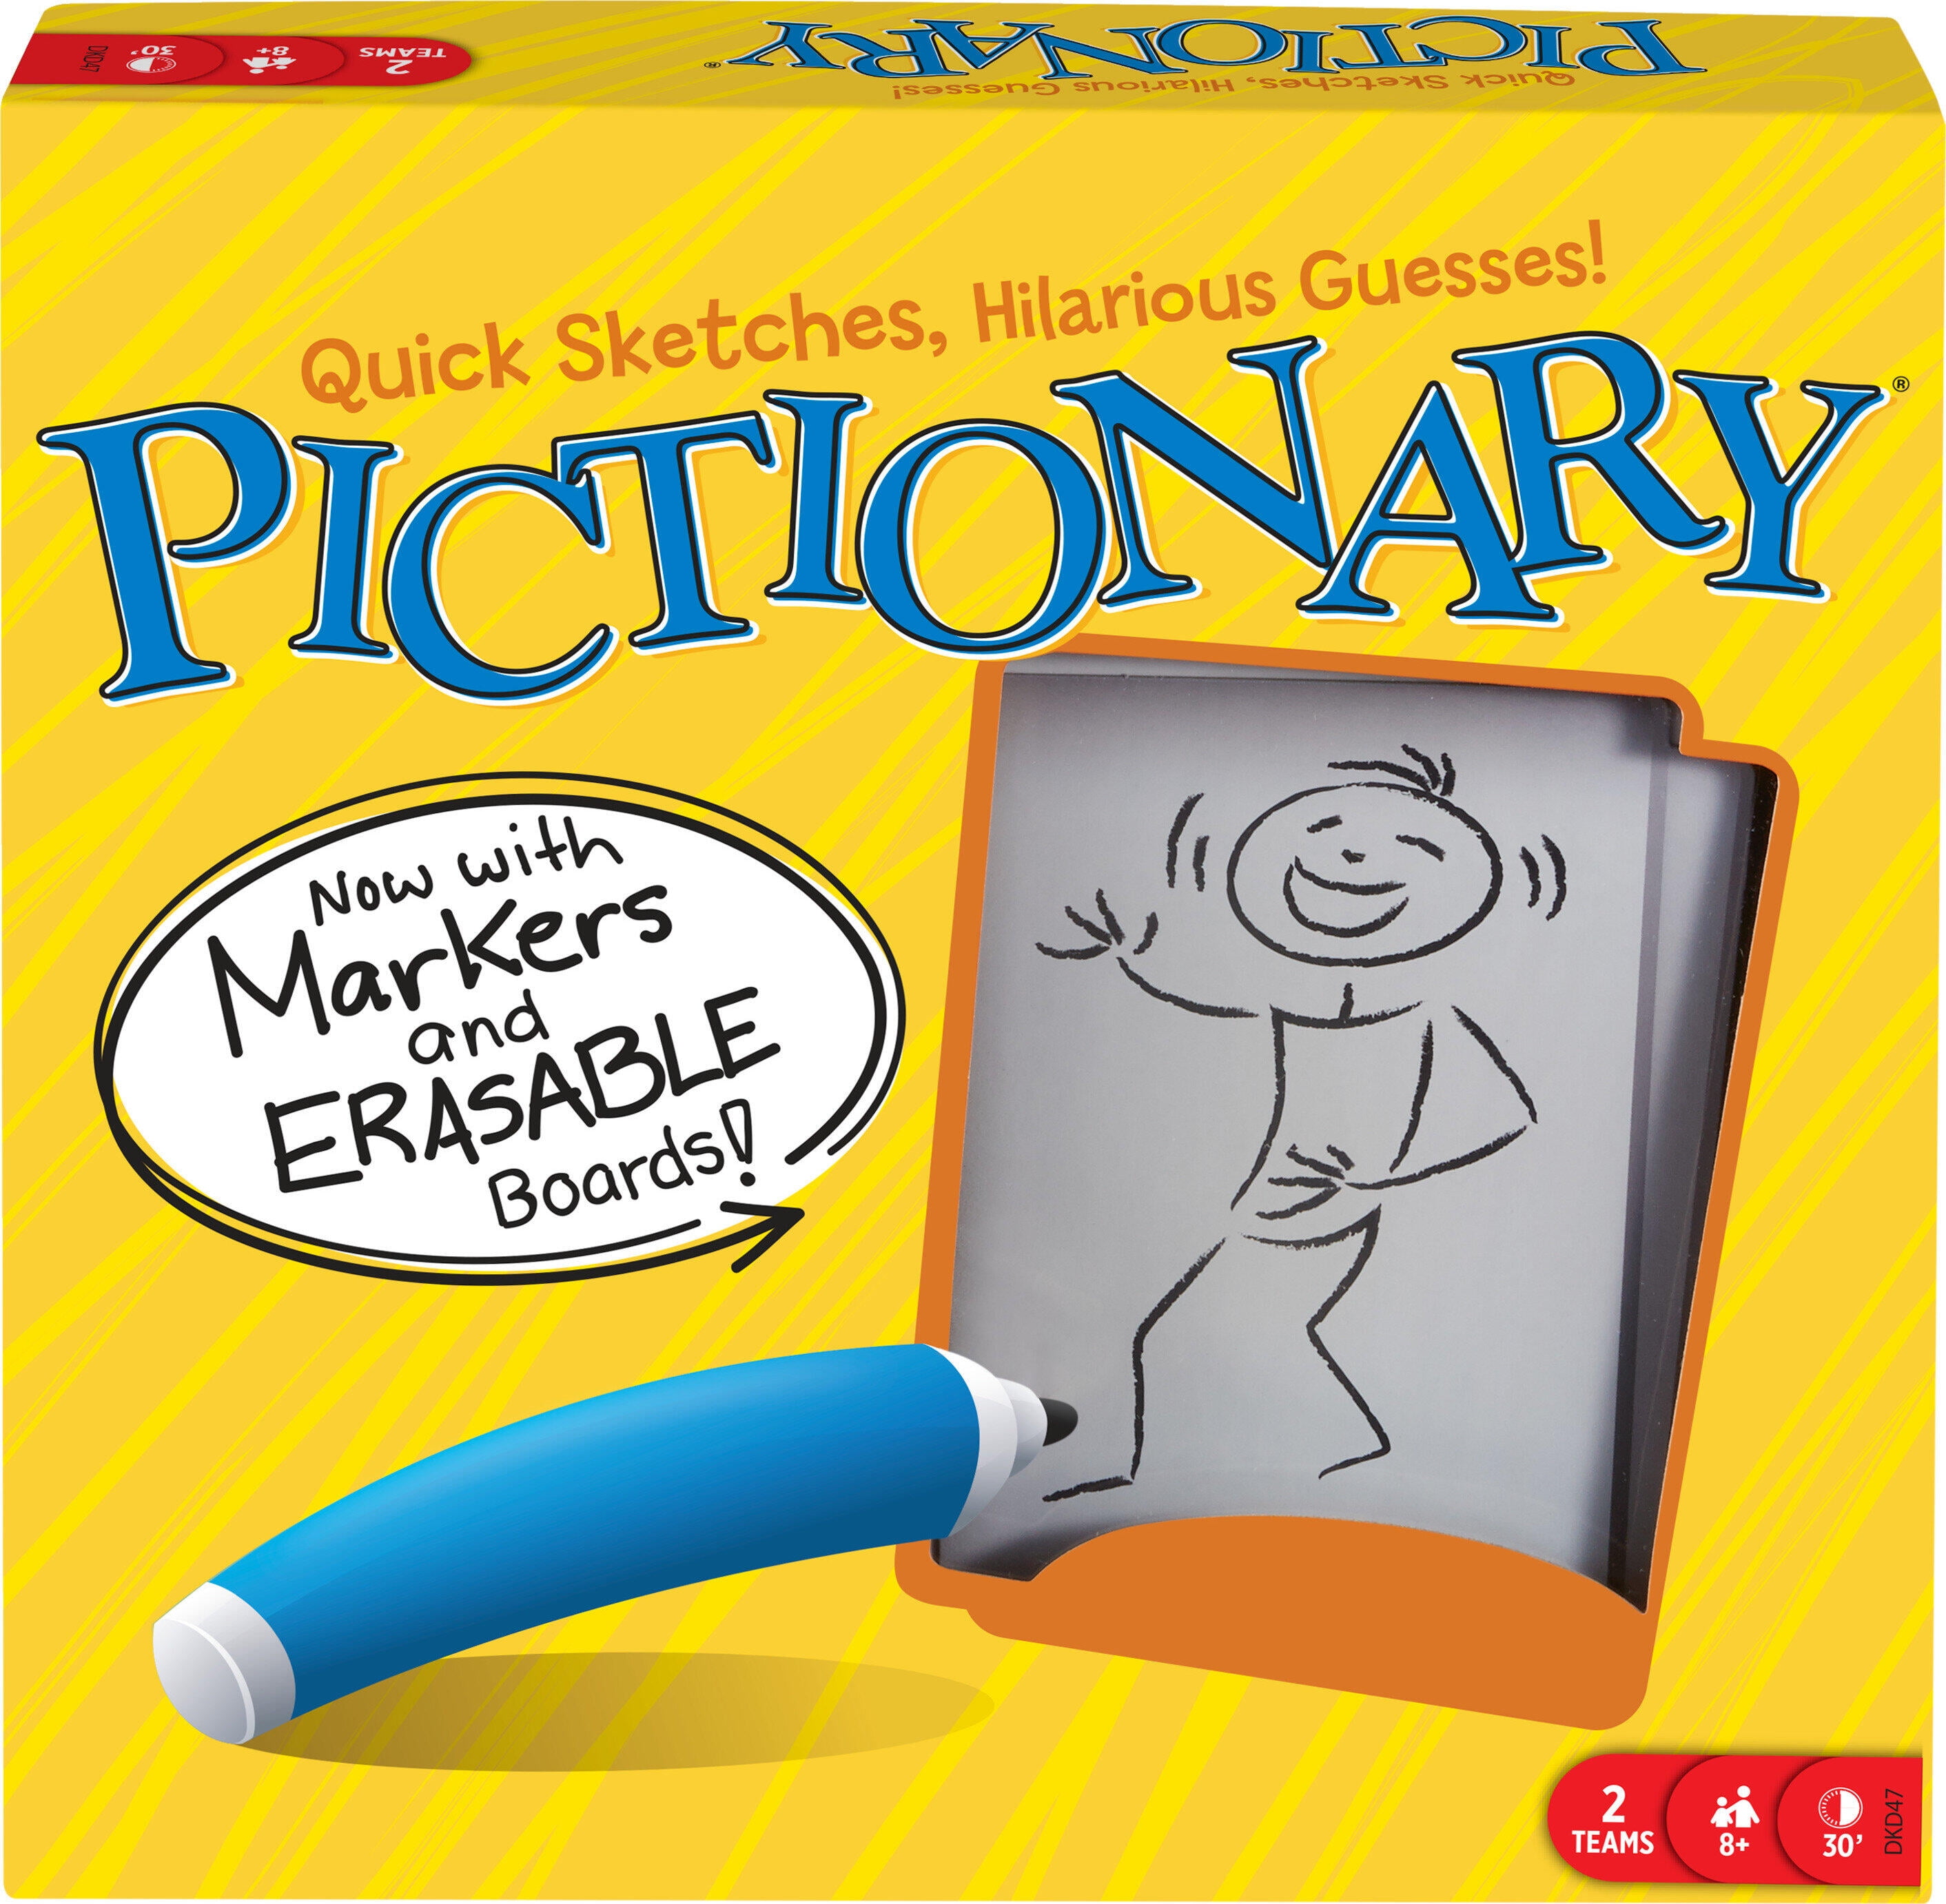 Draw Something Is the Pictionary App You Need